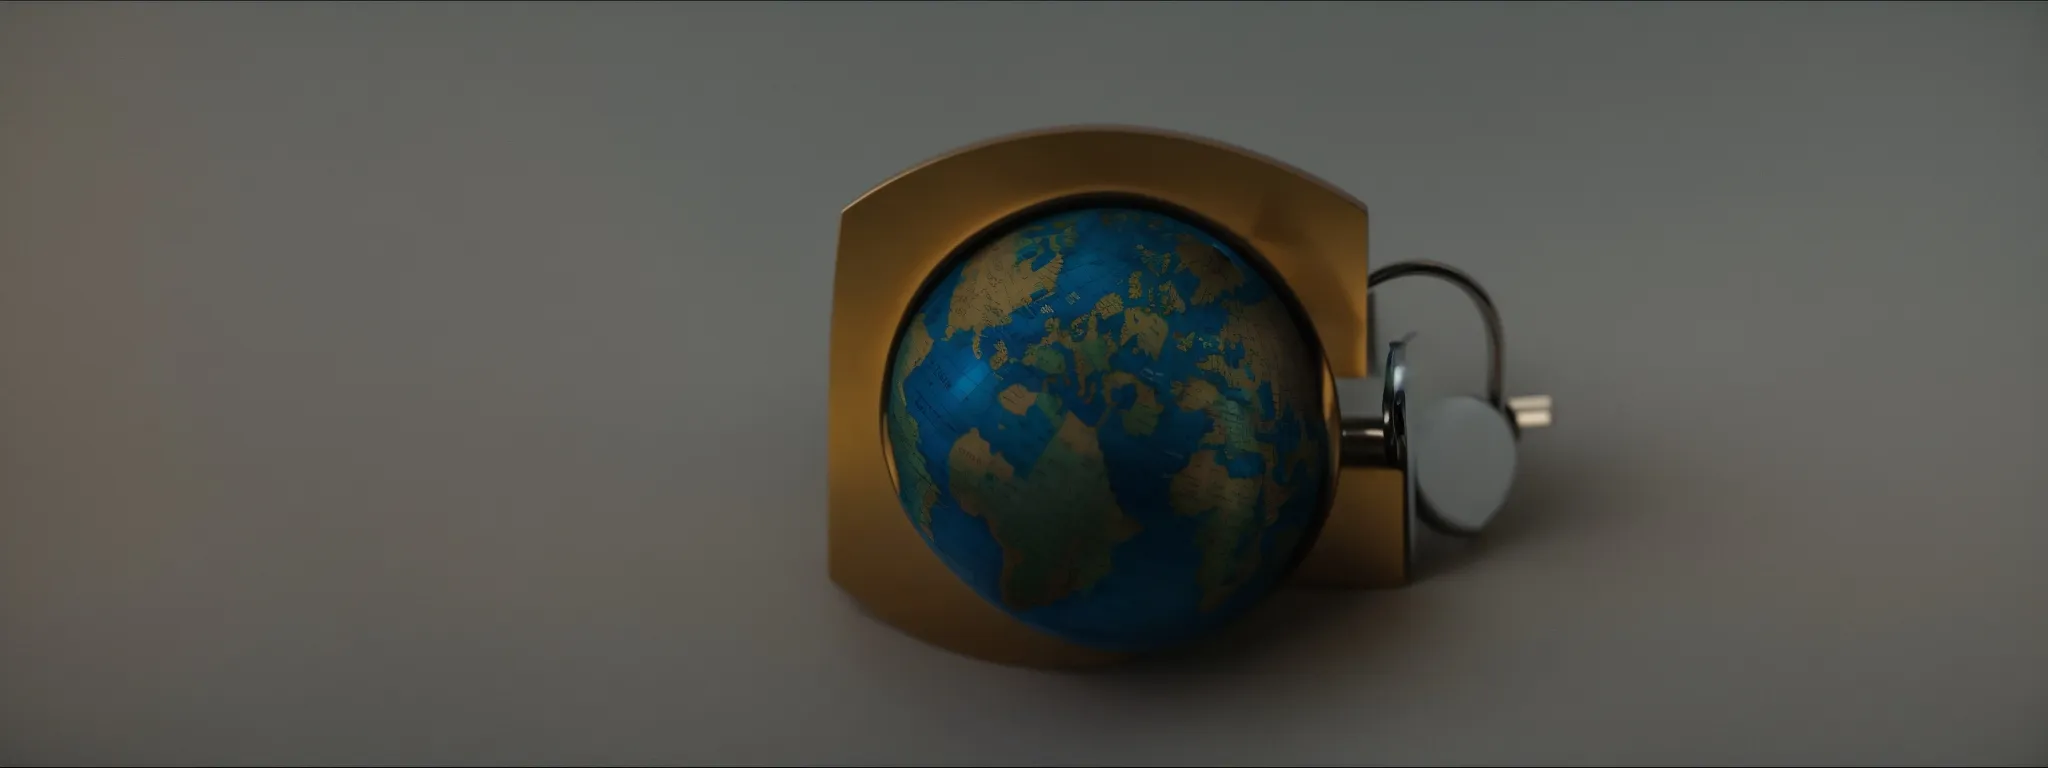 a secure padlock embracing a globe symbolizes internet safety and trustworthiness for ymyl websites.